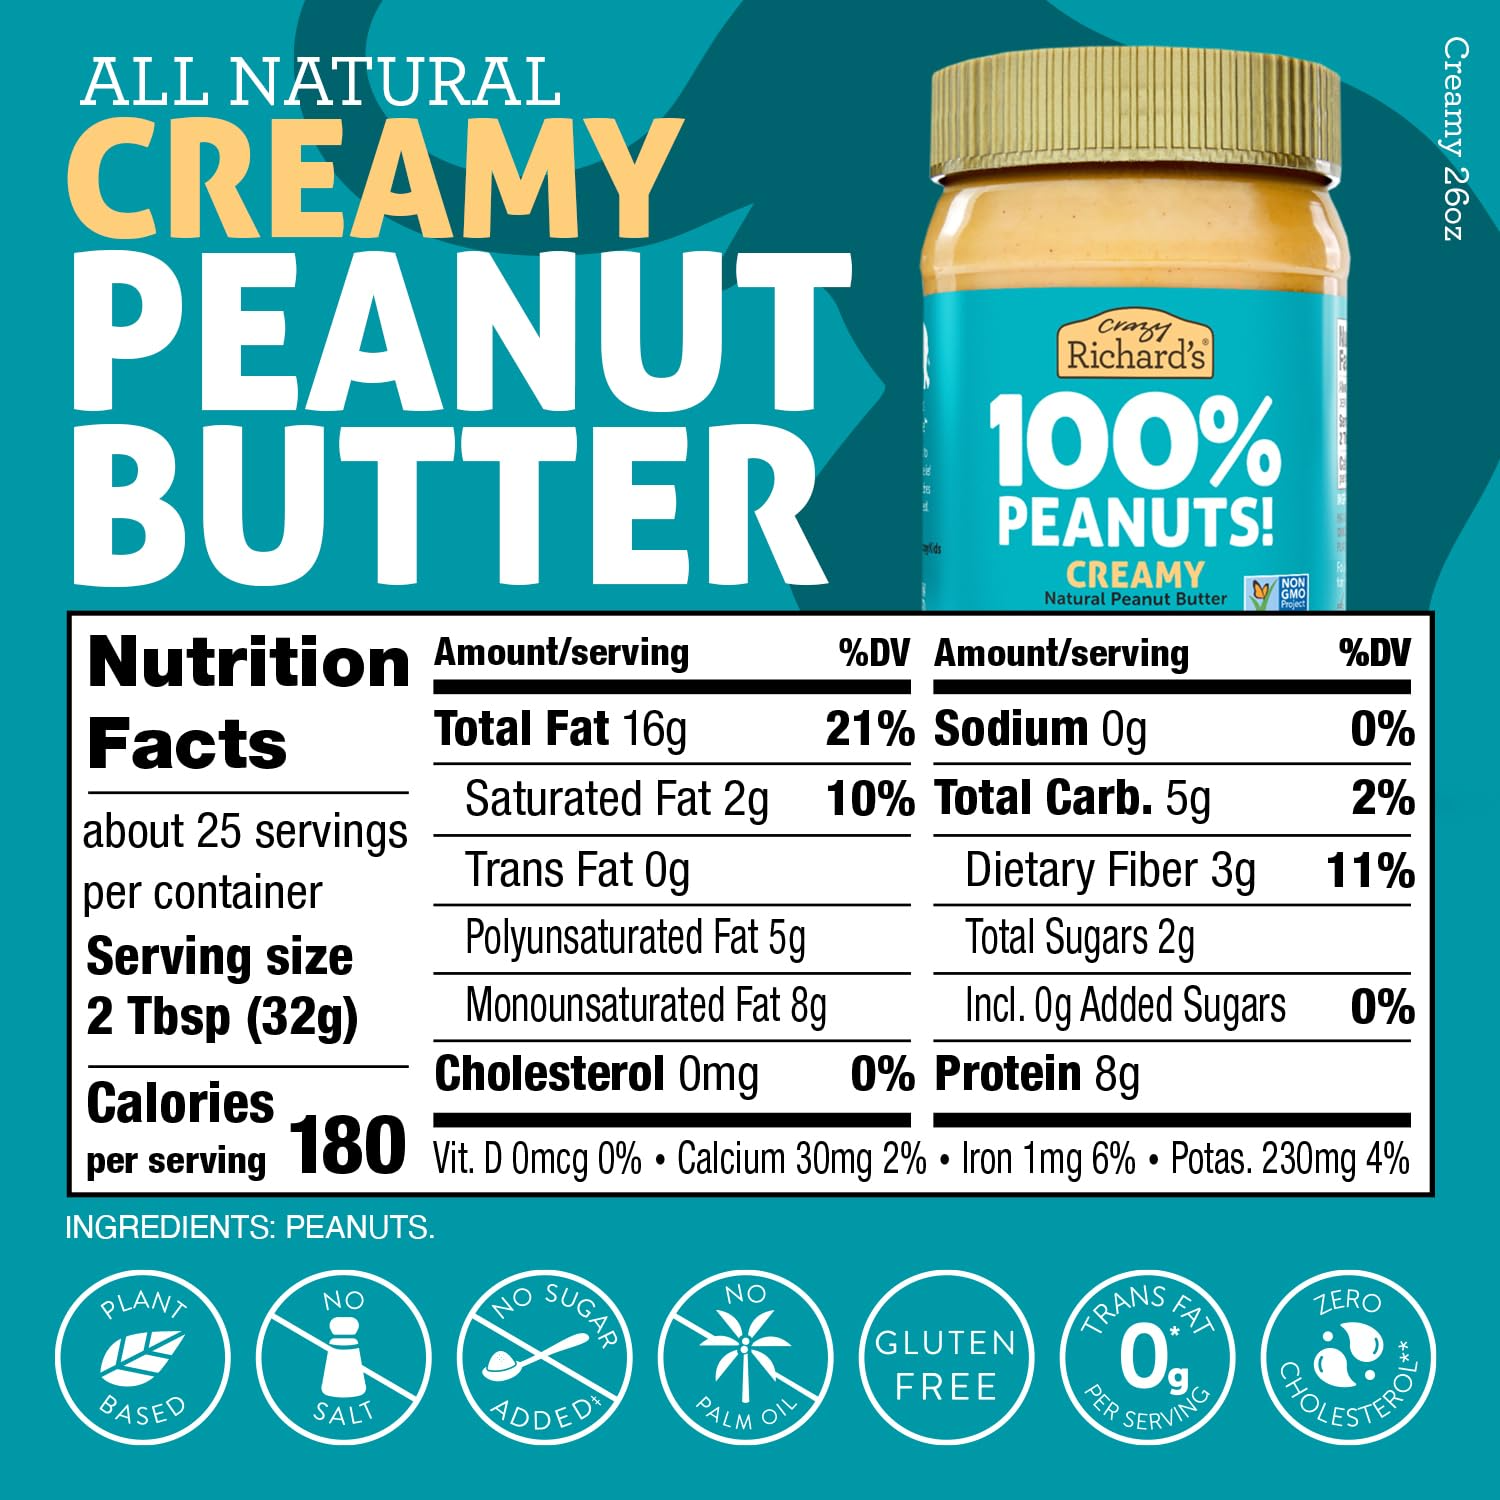 Crazy Richard's 100% All-Natural Creamy Vegan Peanut Butter with No Added Sugar and Non-GMO, 26 Ounce